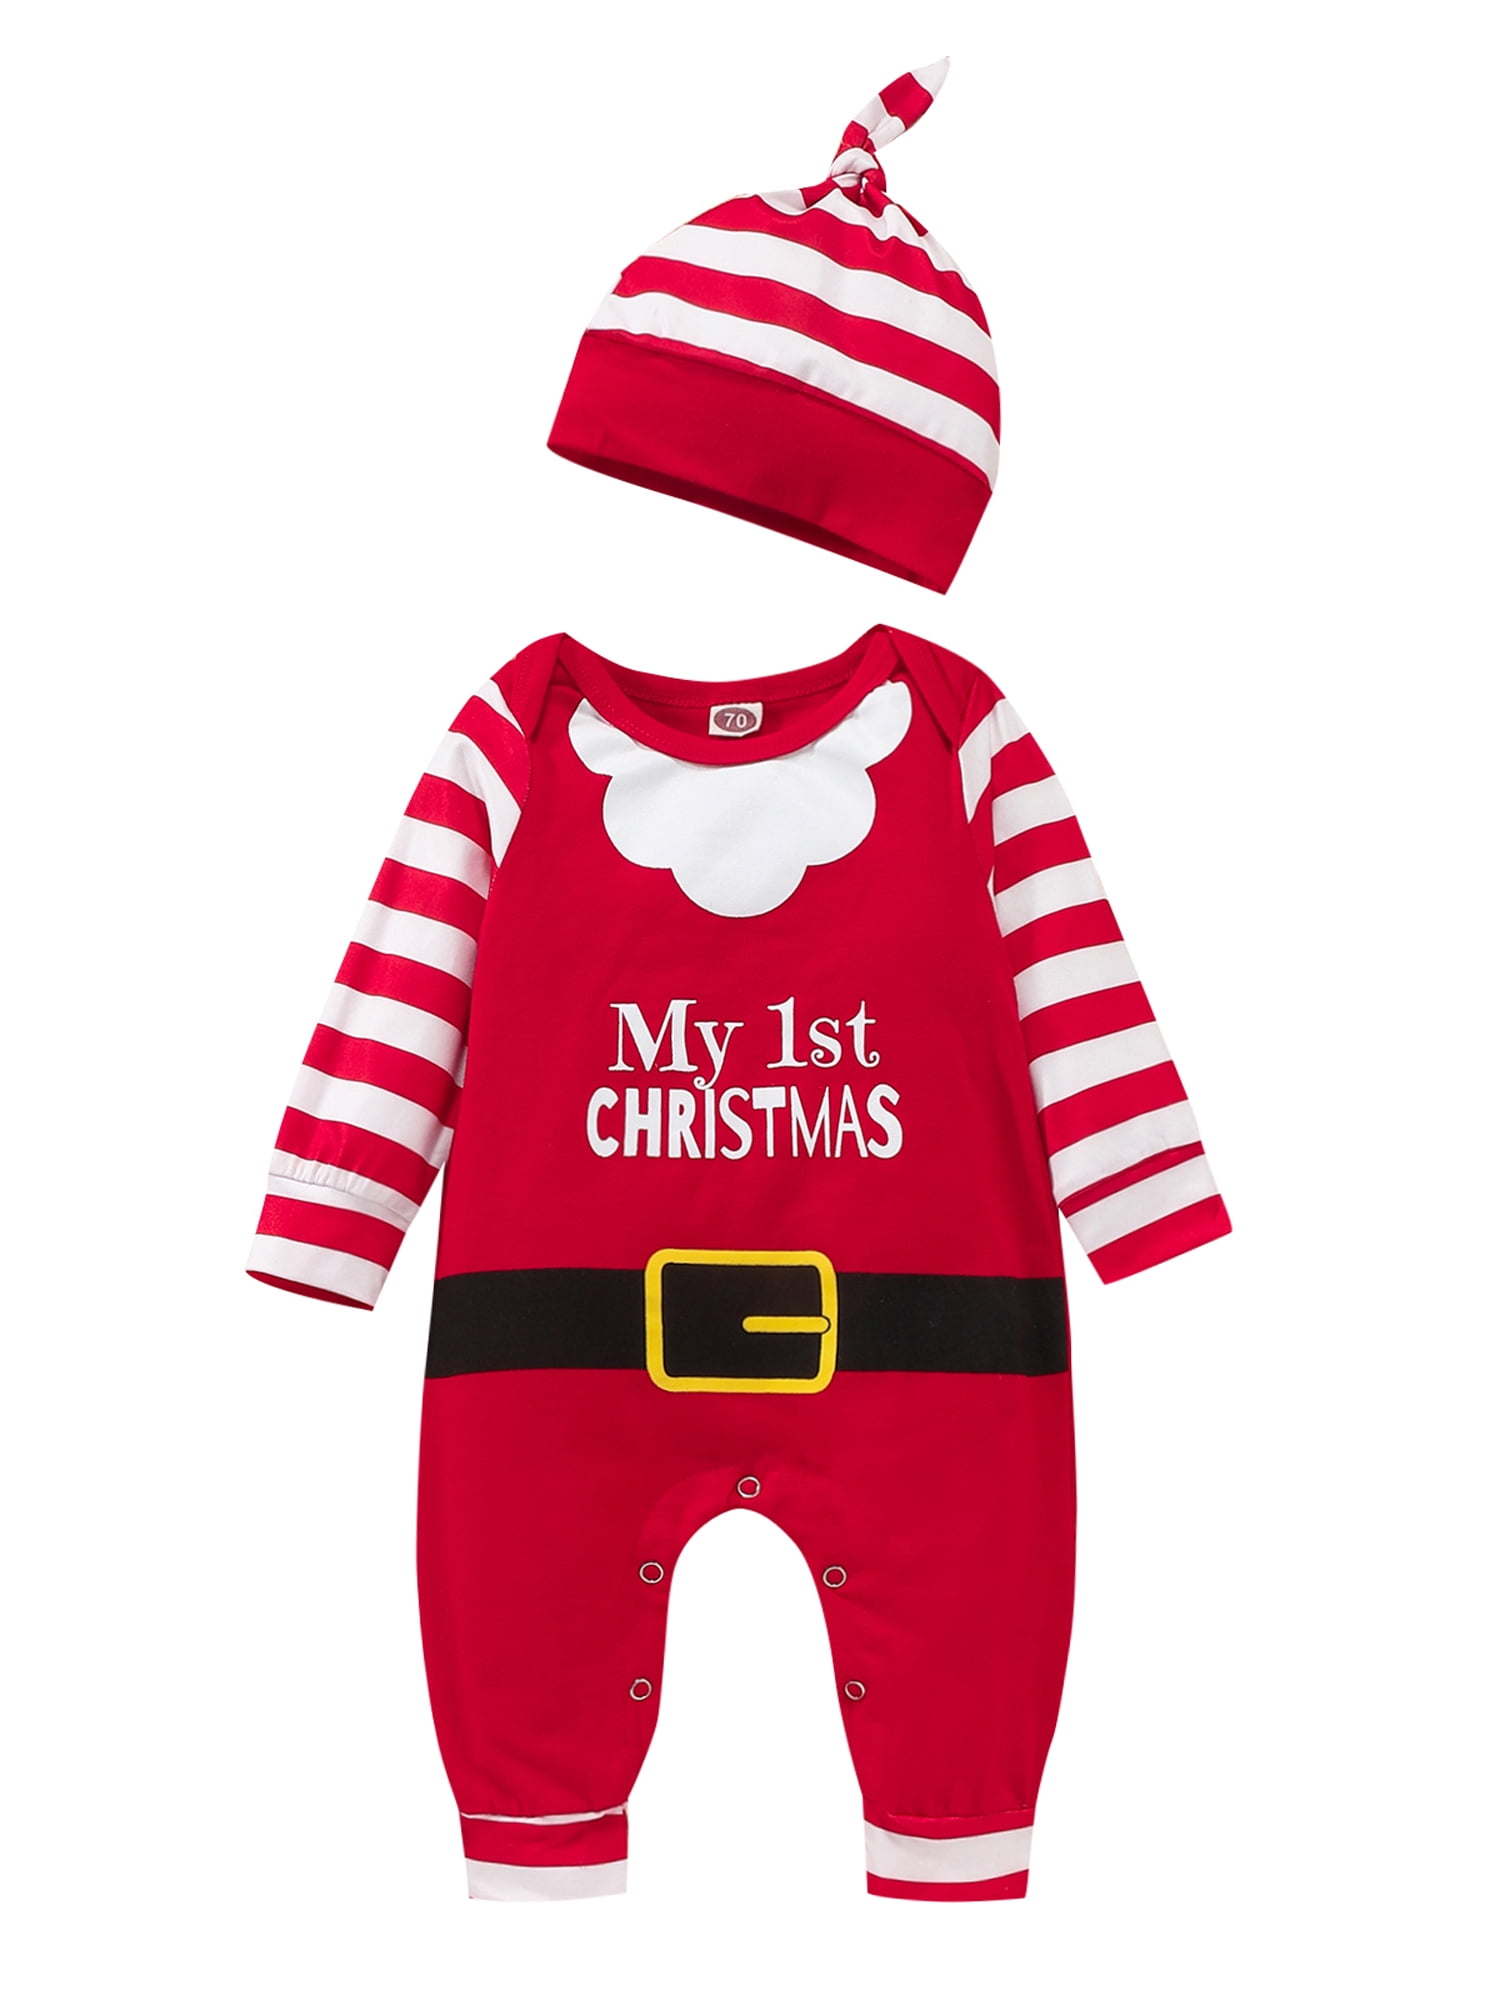 Christmas Newborn Baby Boys Girls Romper Bodysuit Jumpsuit Hat Outfits Clothes 